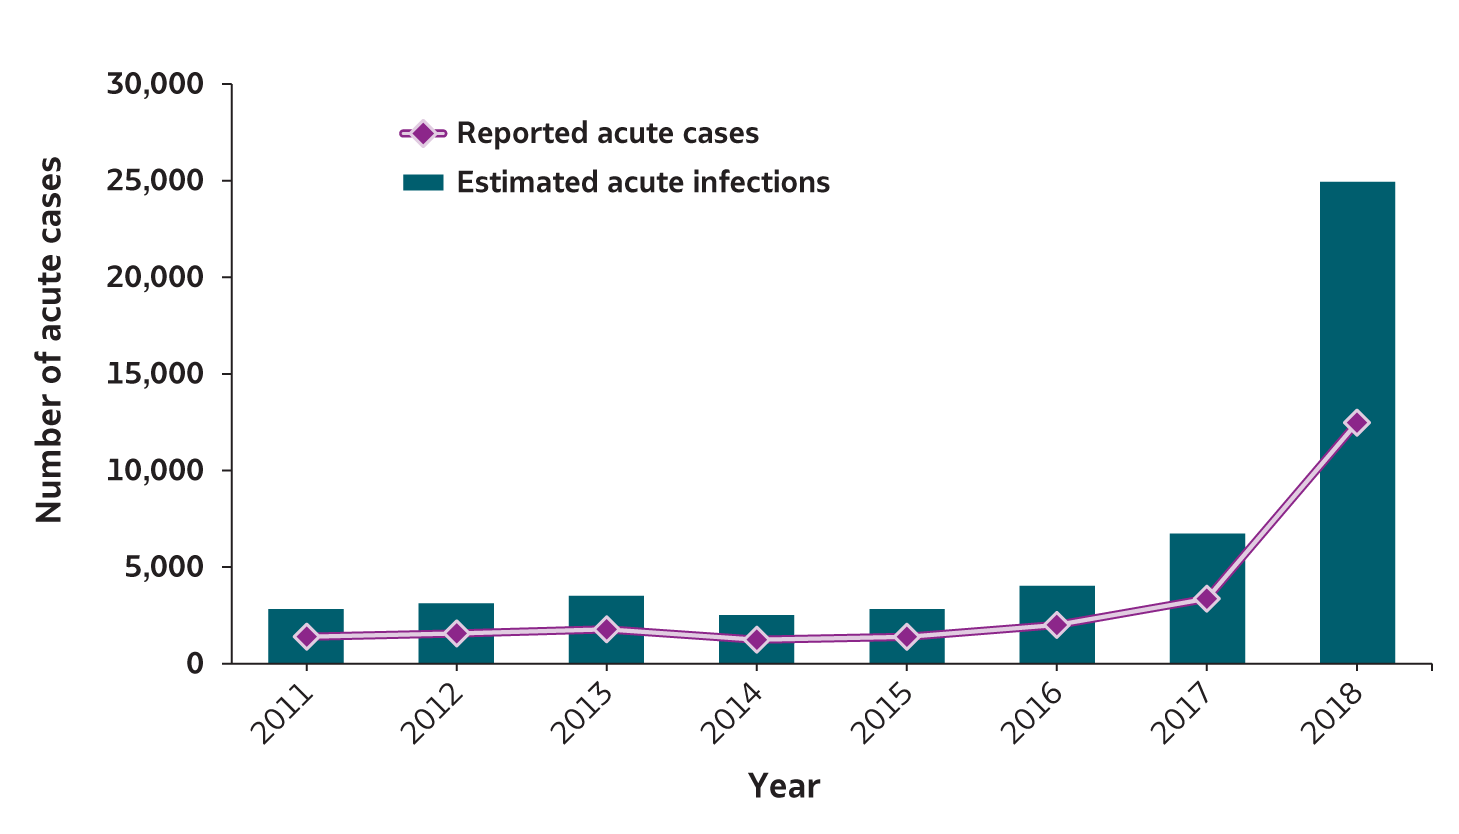 Figure 1.1.  Number of reported hepatitis A cases and estimated infections – United States, 2011-2018.  From 2011 – 2015, the number of reported cases and estimated hepatitis A infections generally remained constant, followed by an increase each year from 2016 through 2018. 